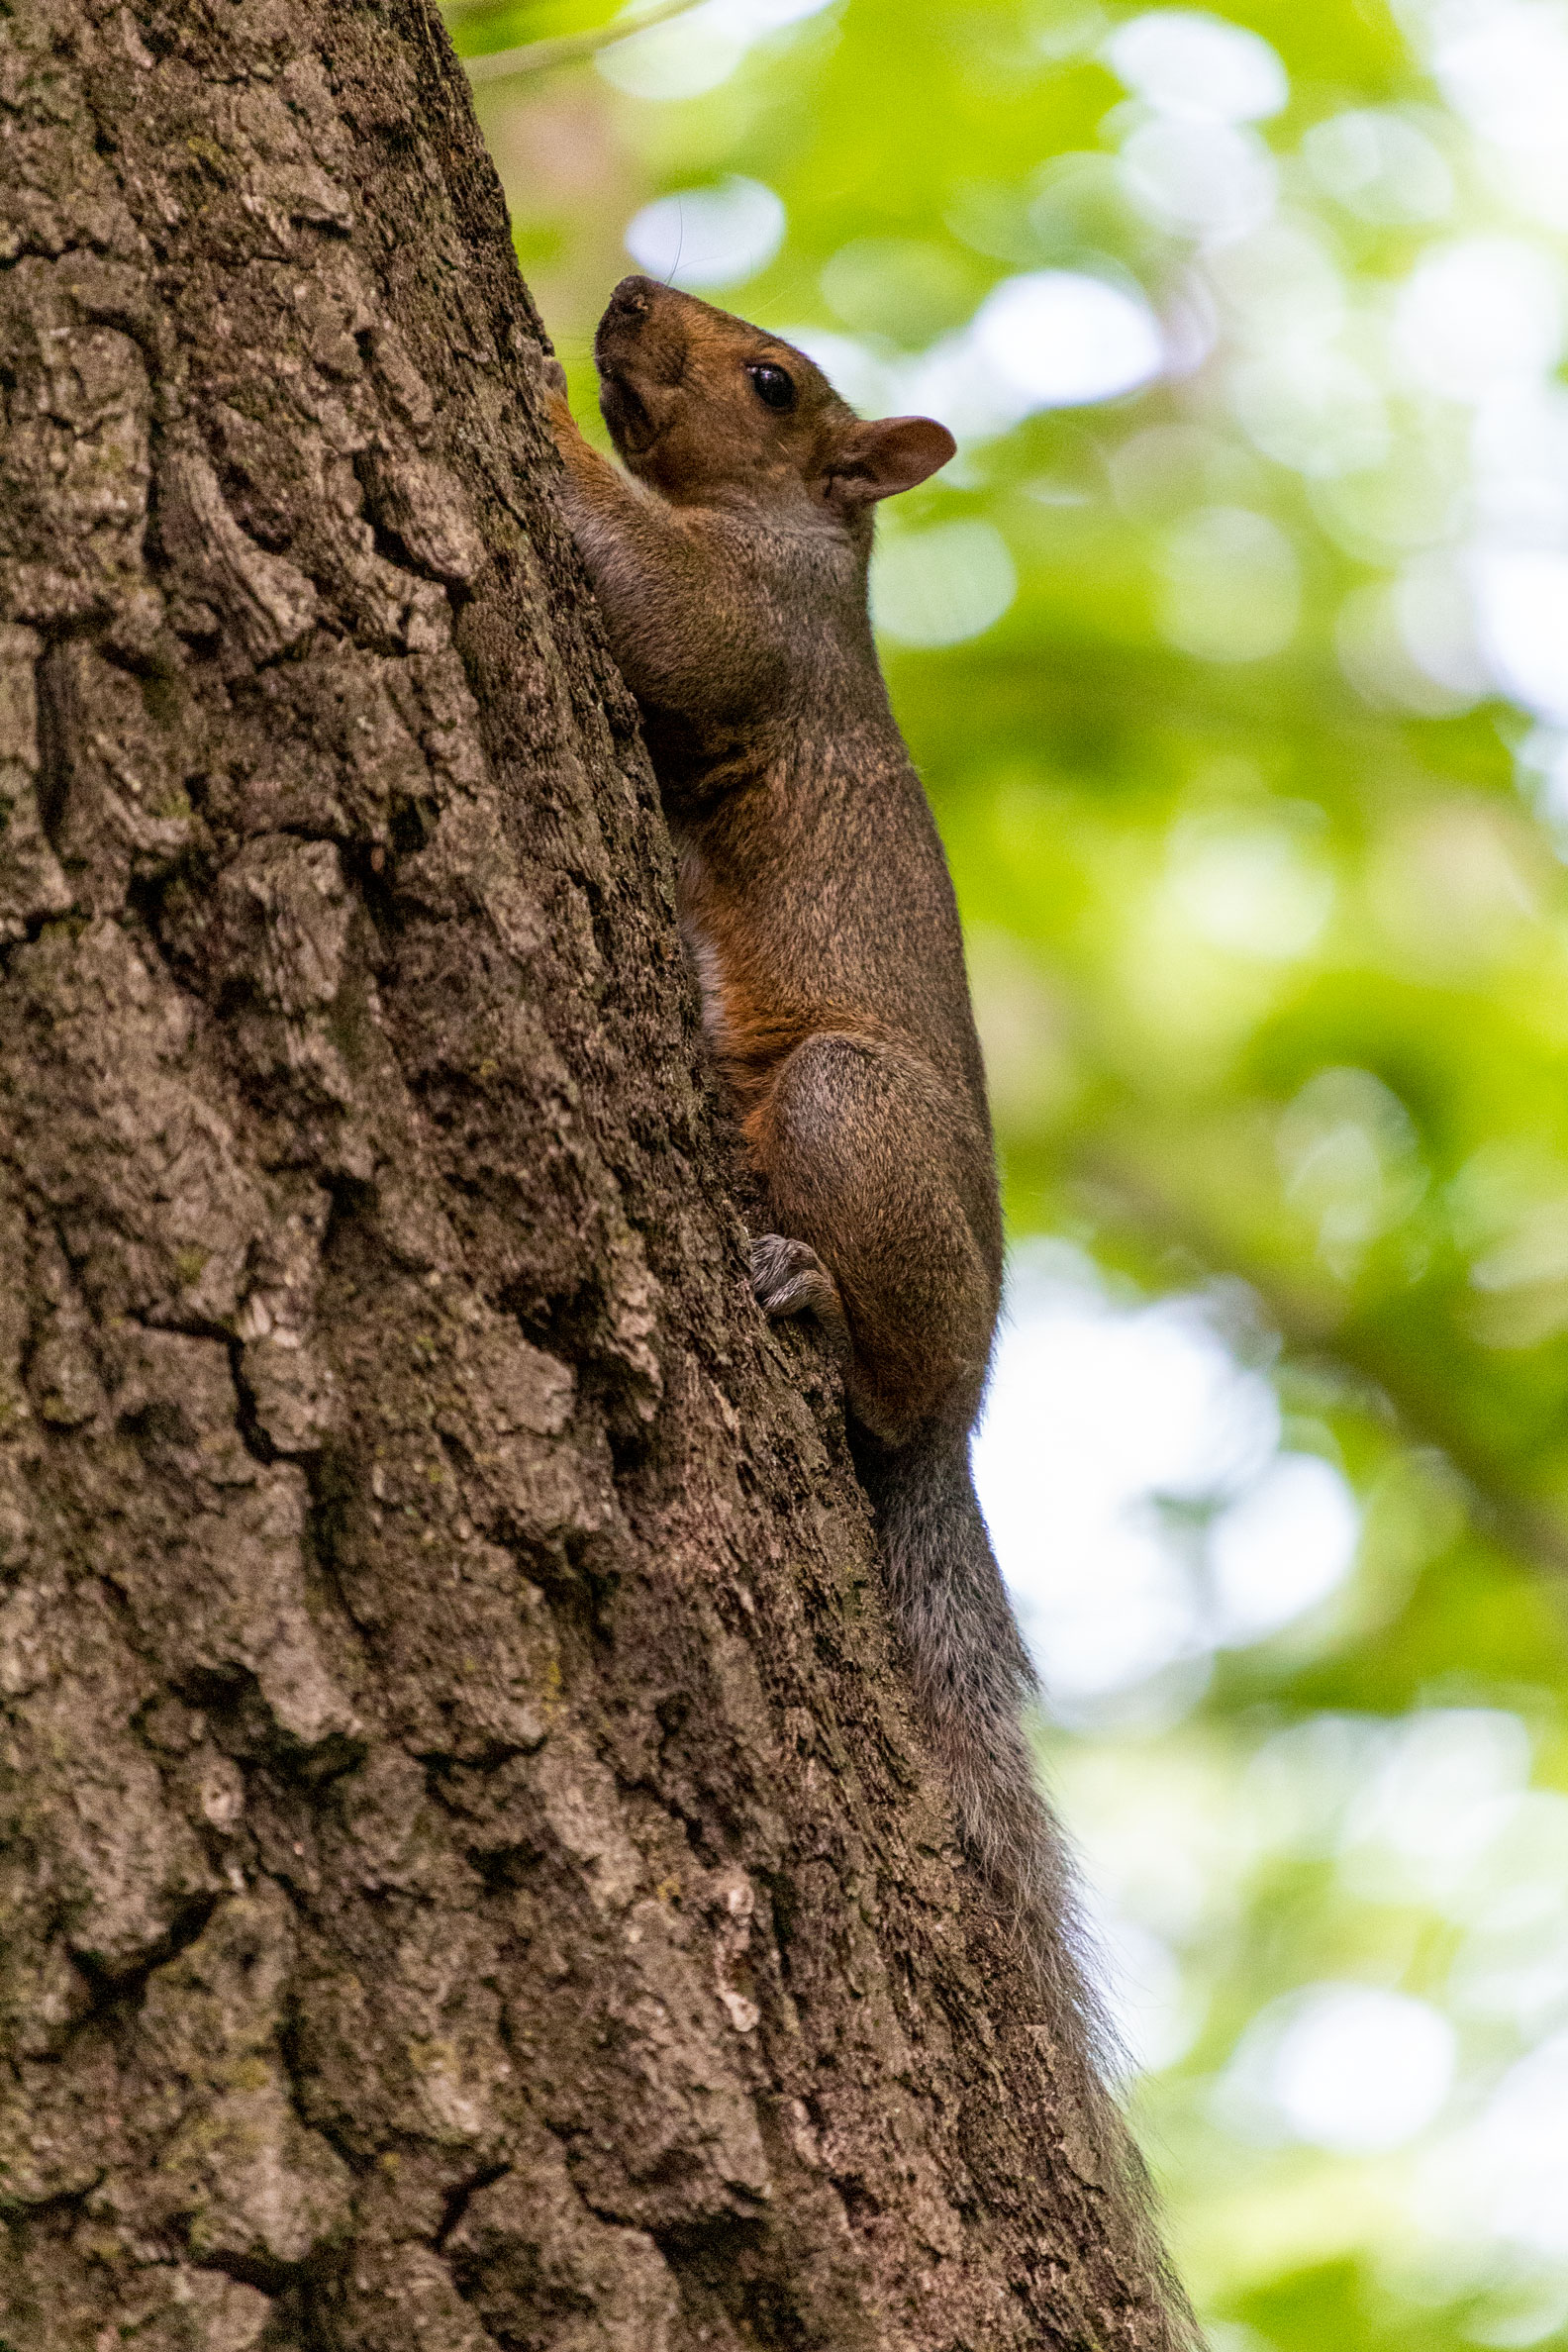 Squirrel clinging to the side of a tree looking thoroughly displeased